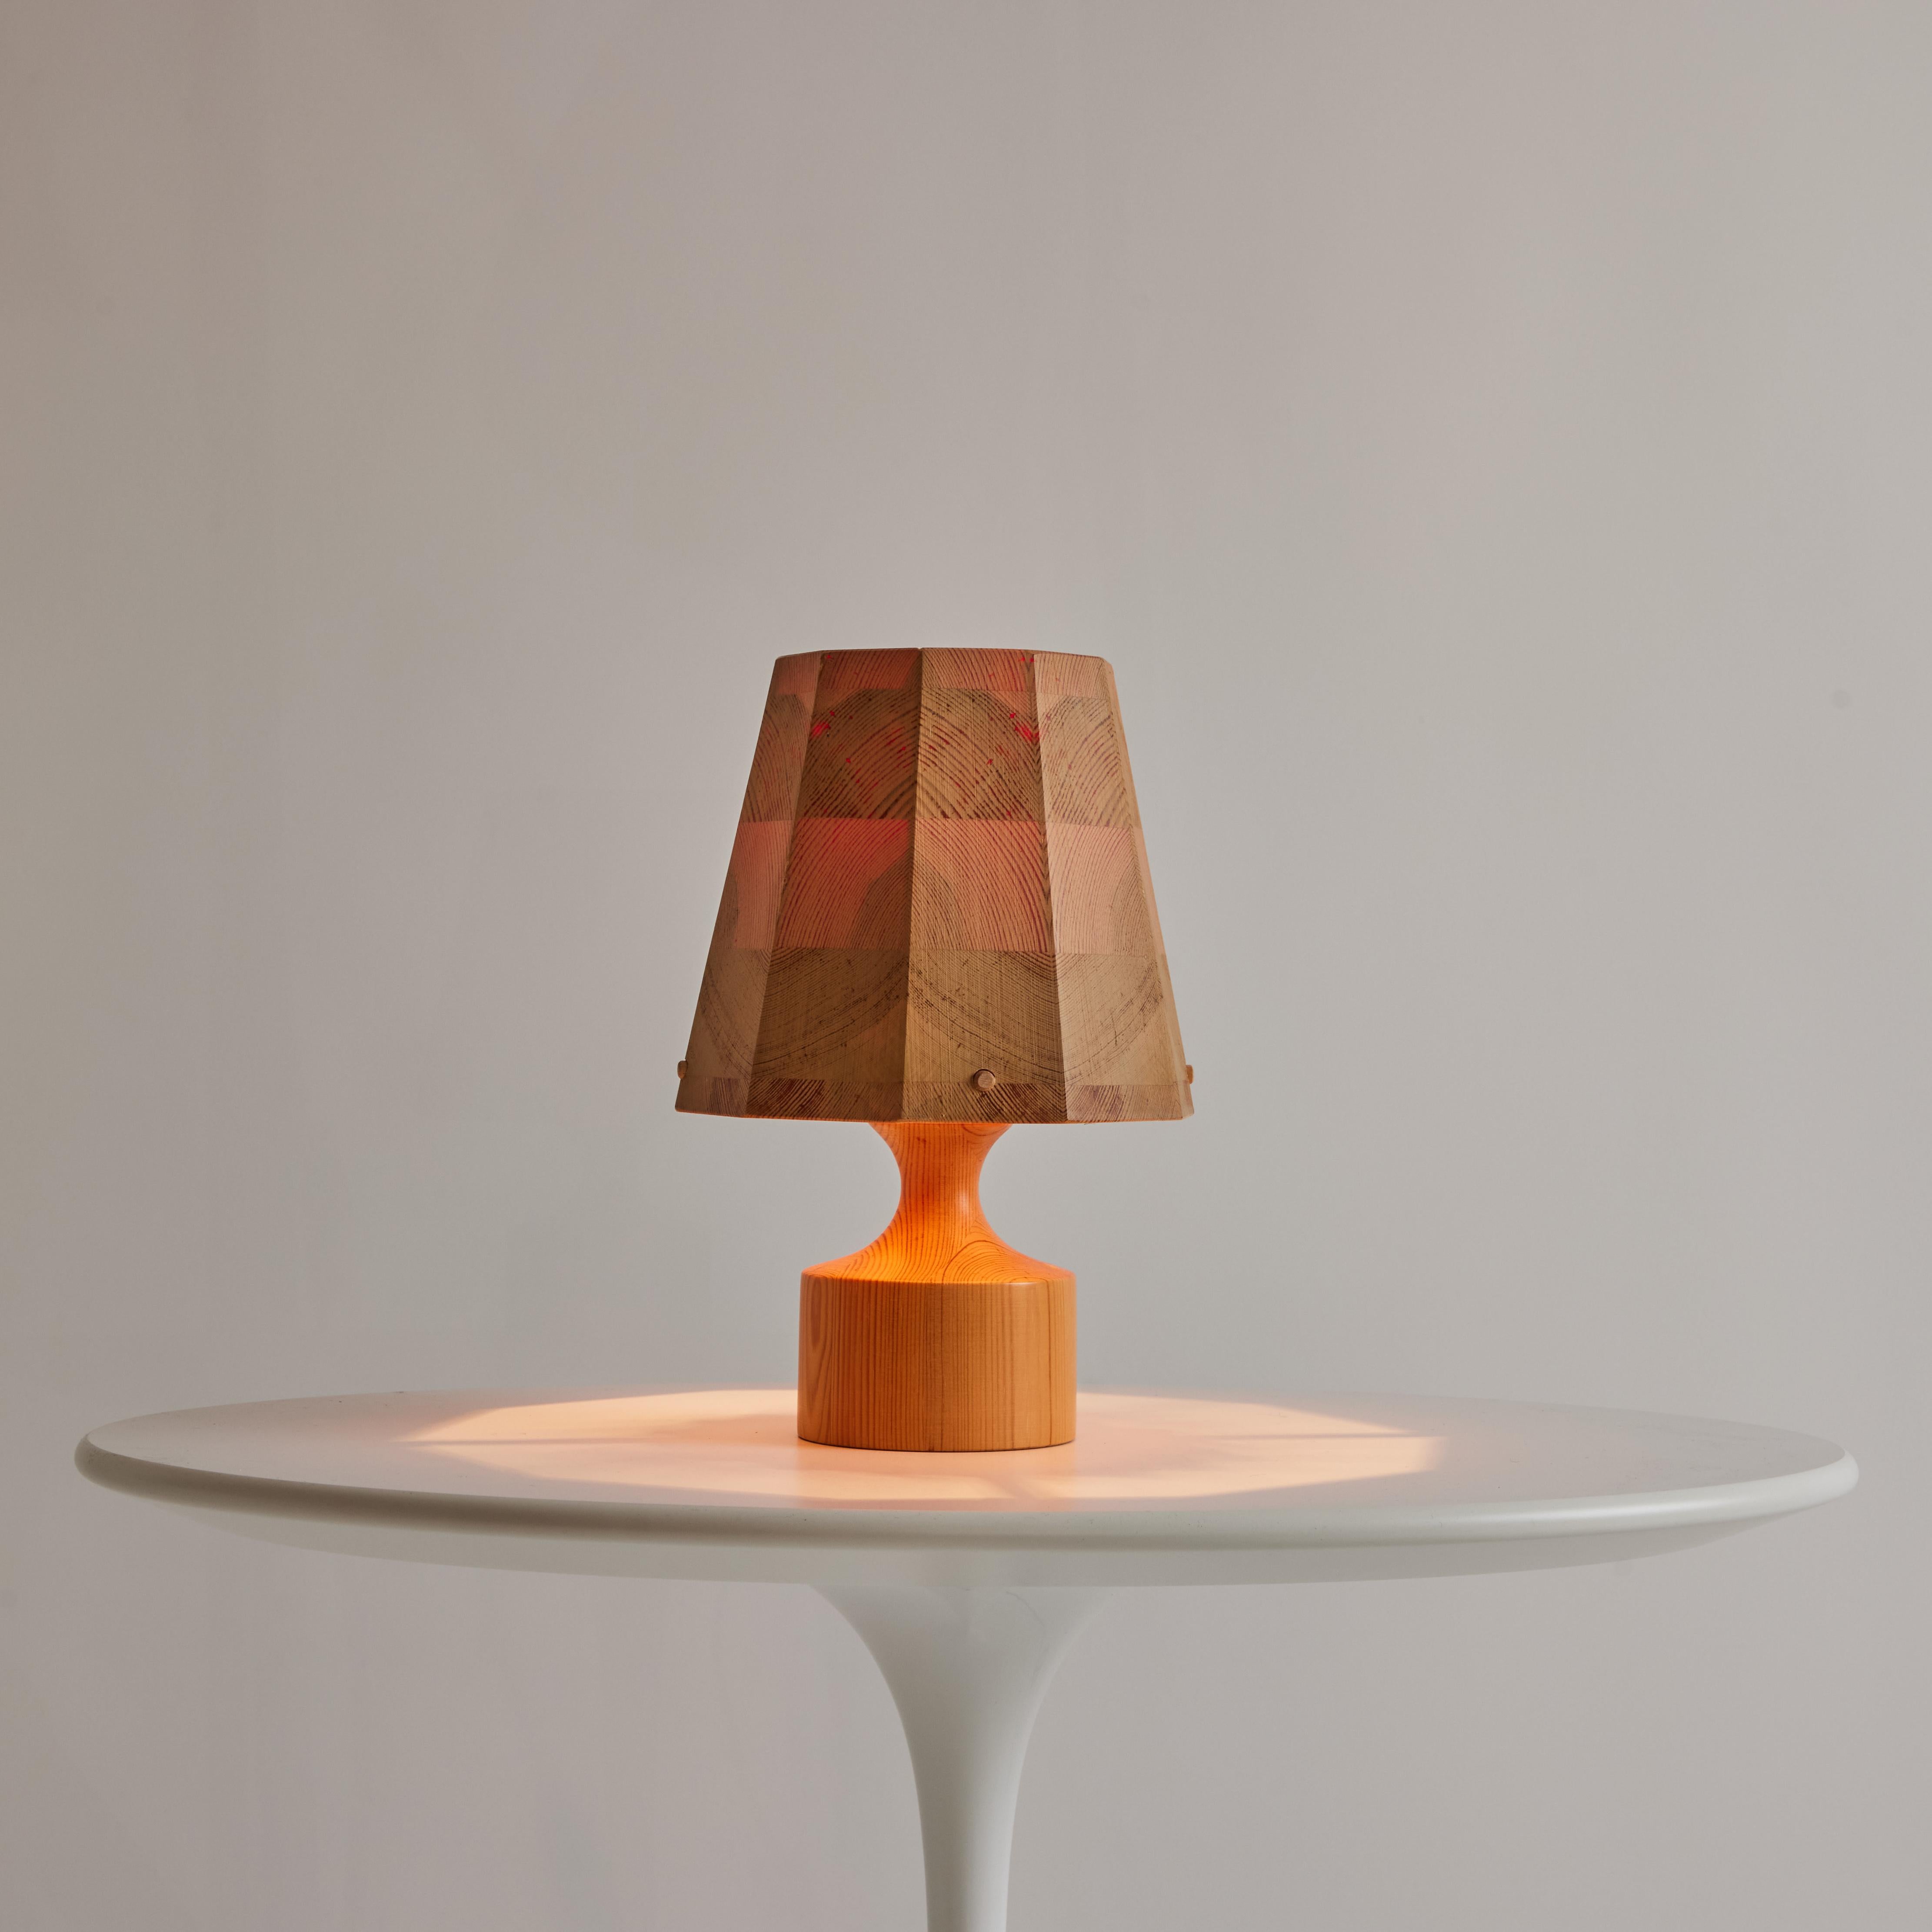 Scandinavian Modern Pair of 1960s Wood Table Lamps Attributed to Hans-Agne Jakobsson for AB Ellysett For Sale